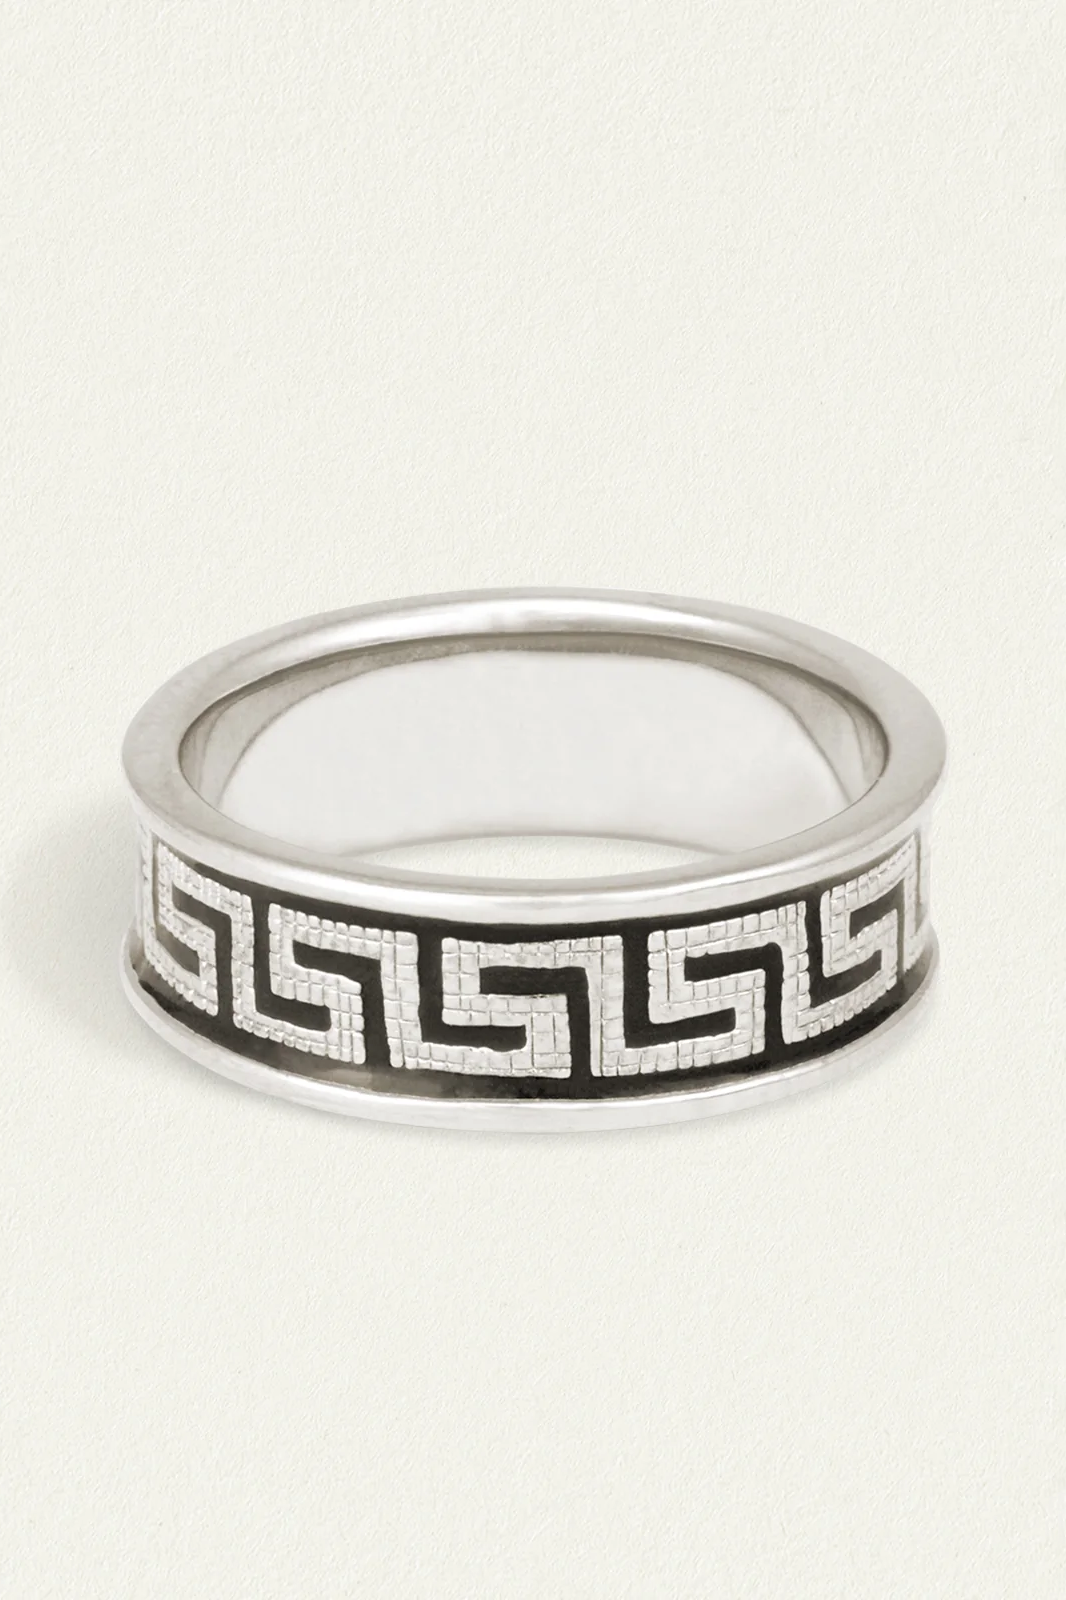 Meander Ring - Silver